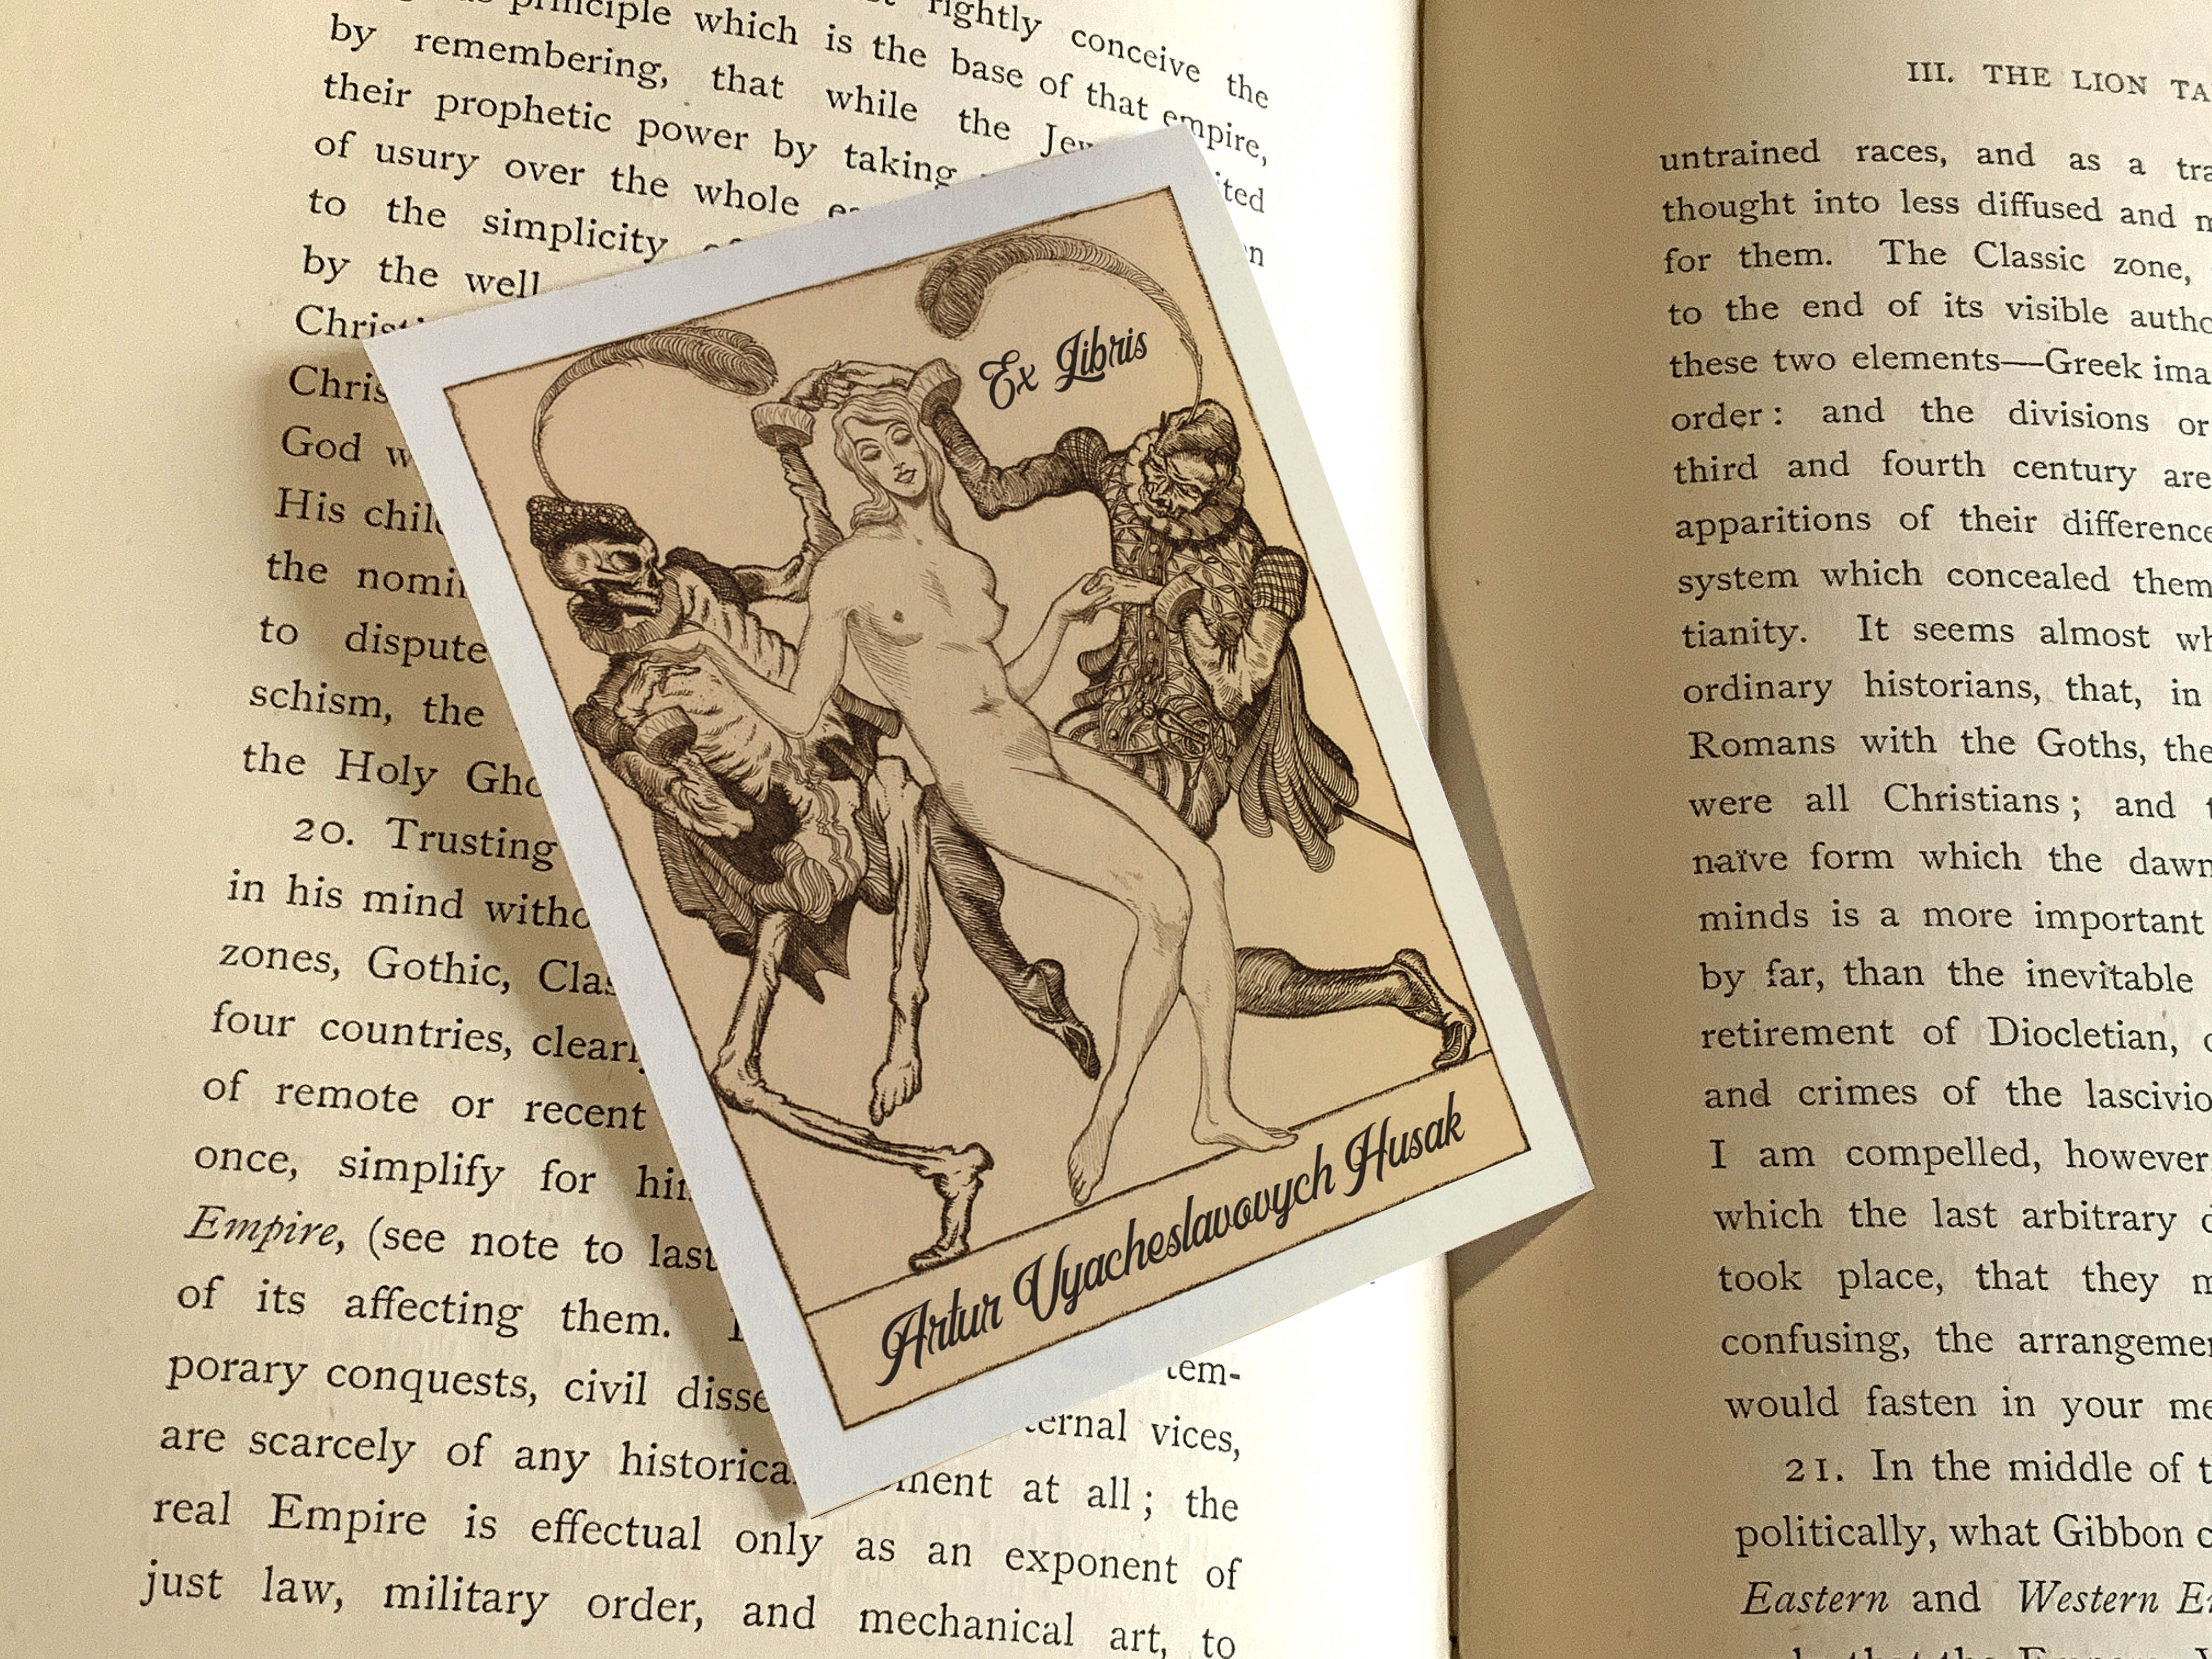 Bone Dance, Erotic Personalized Gothic Ex-Libris Bookplates, Crafted on Traditional Gummed Paper, 3in x 4in, Set of 30